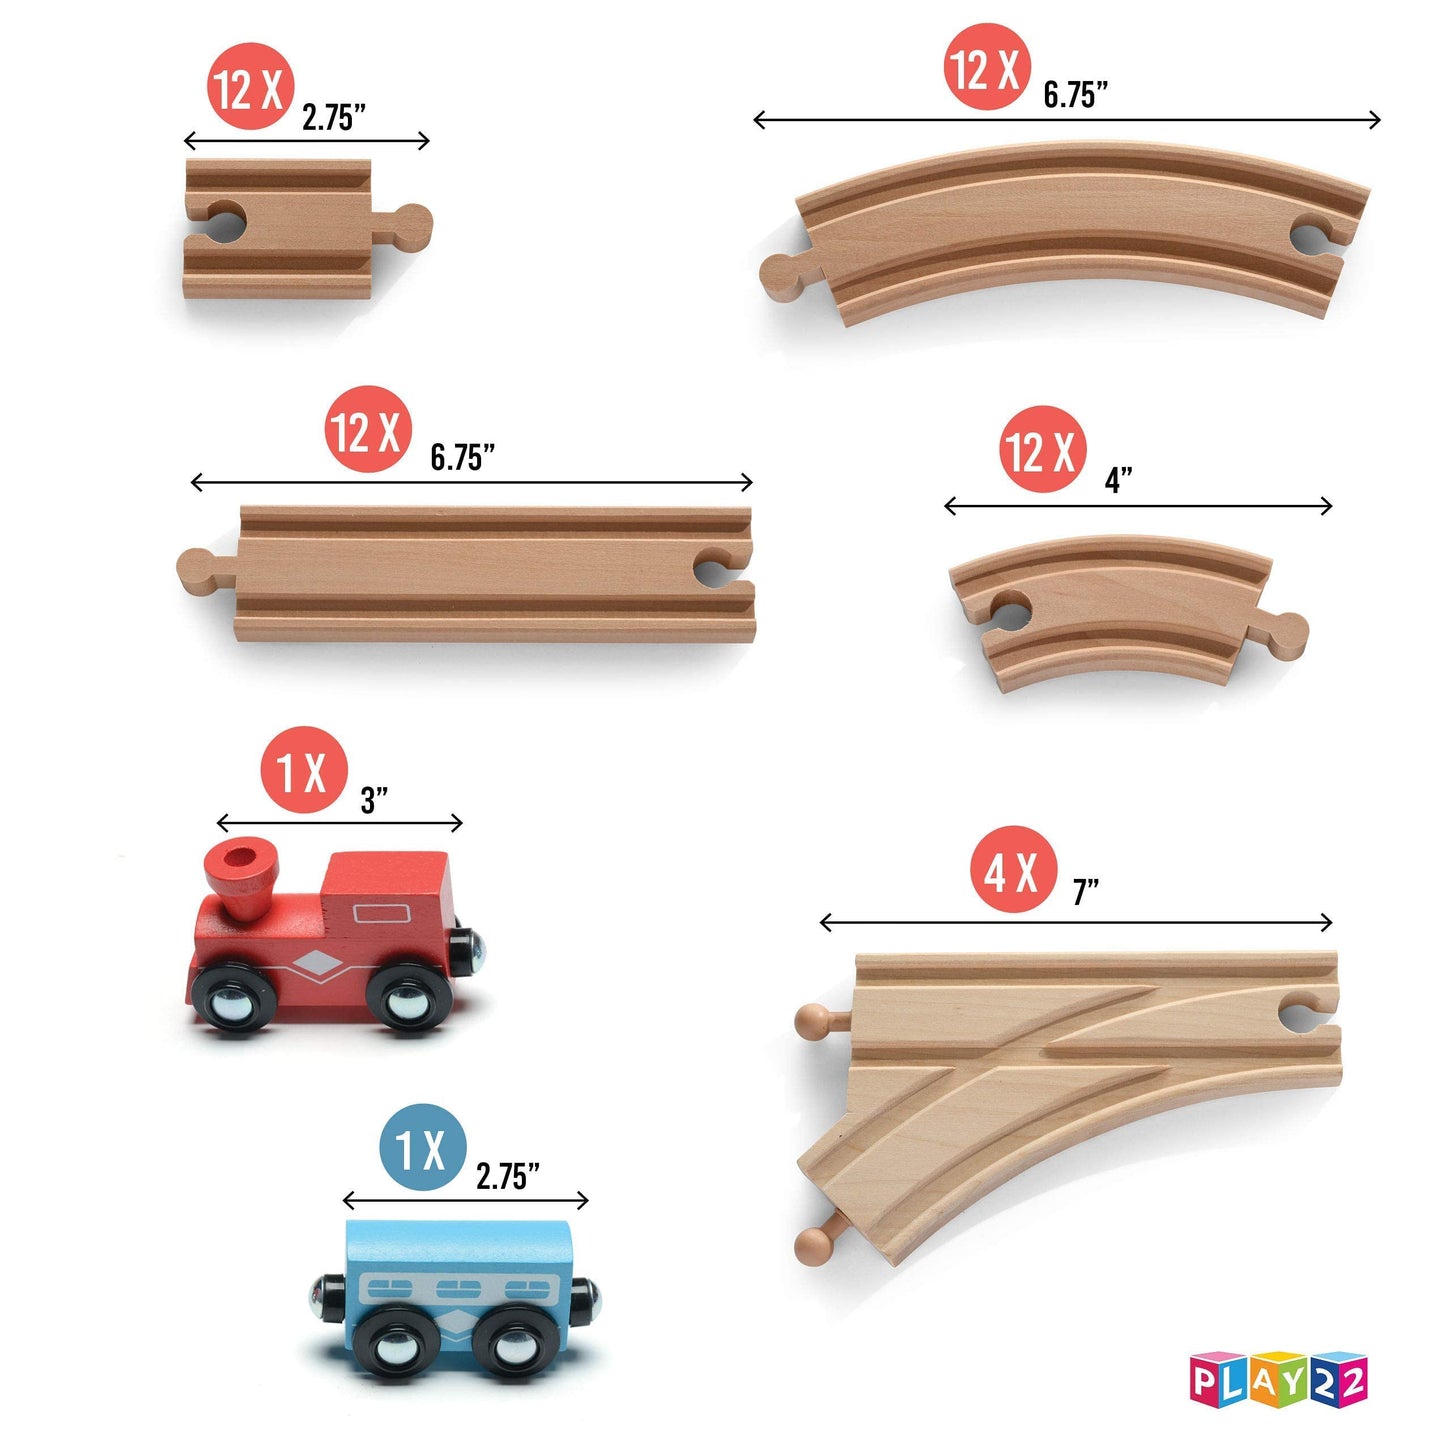 Play22 Wooden Train Tracks - 52 PCS + 2 Bonus Car Toy Trains - for Kids is Compatible with Thomas Wooden Railway Systems and All Major Brands -